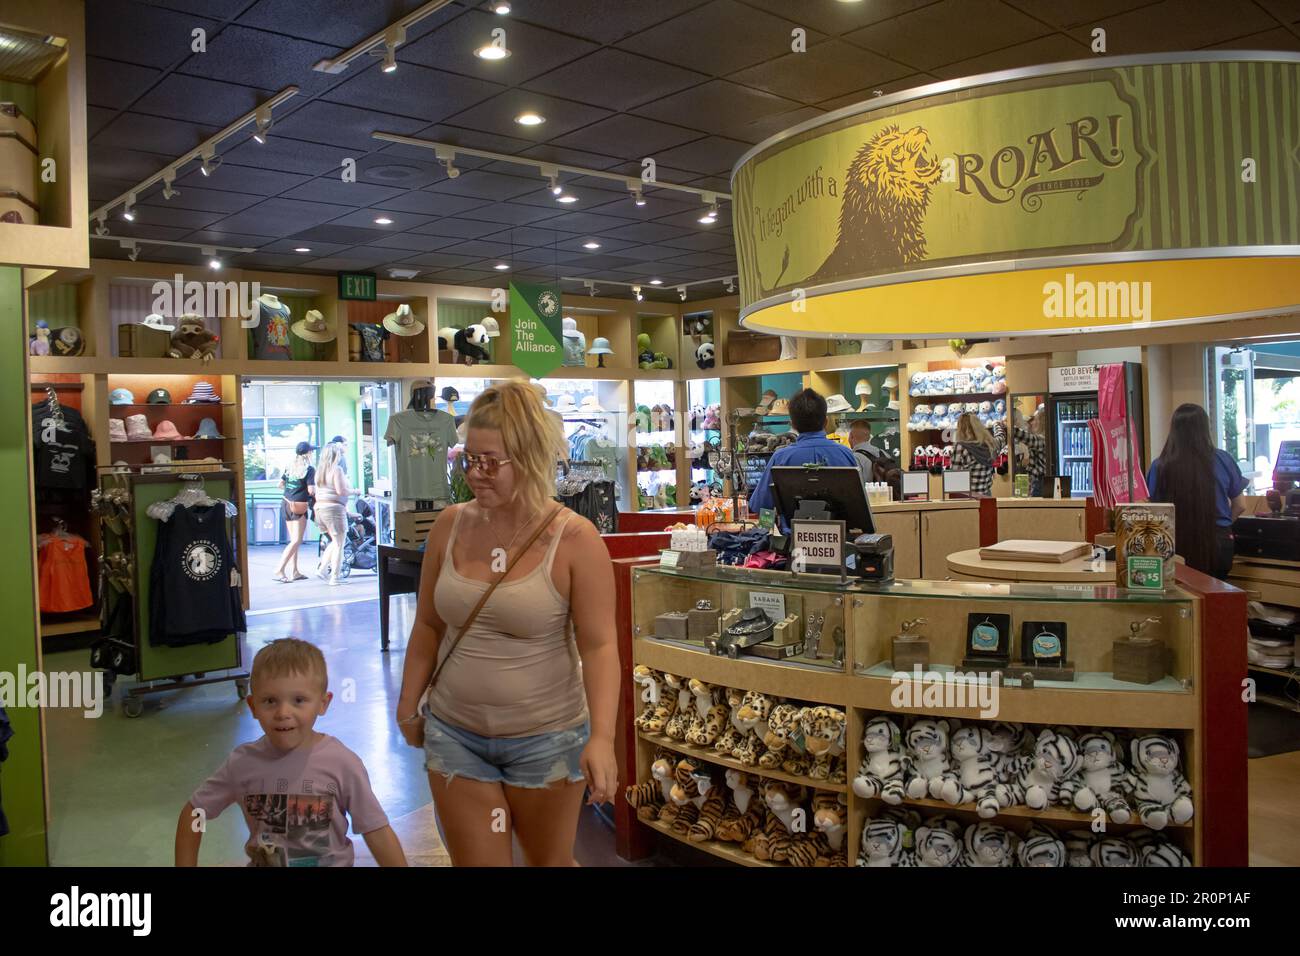 San Diego, California, United States - 09-23-2021: A view of guests walking around a San Diego Zoo gift shop. Stock Photo